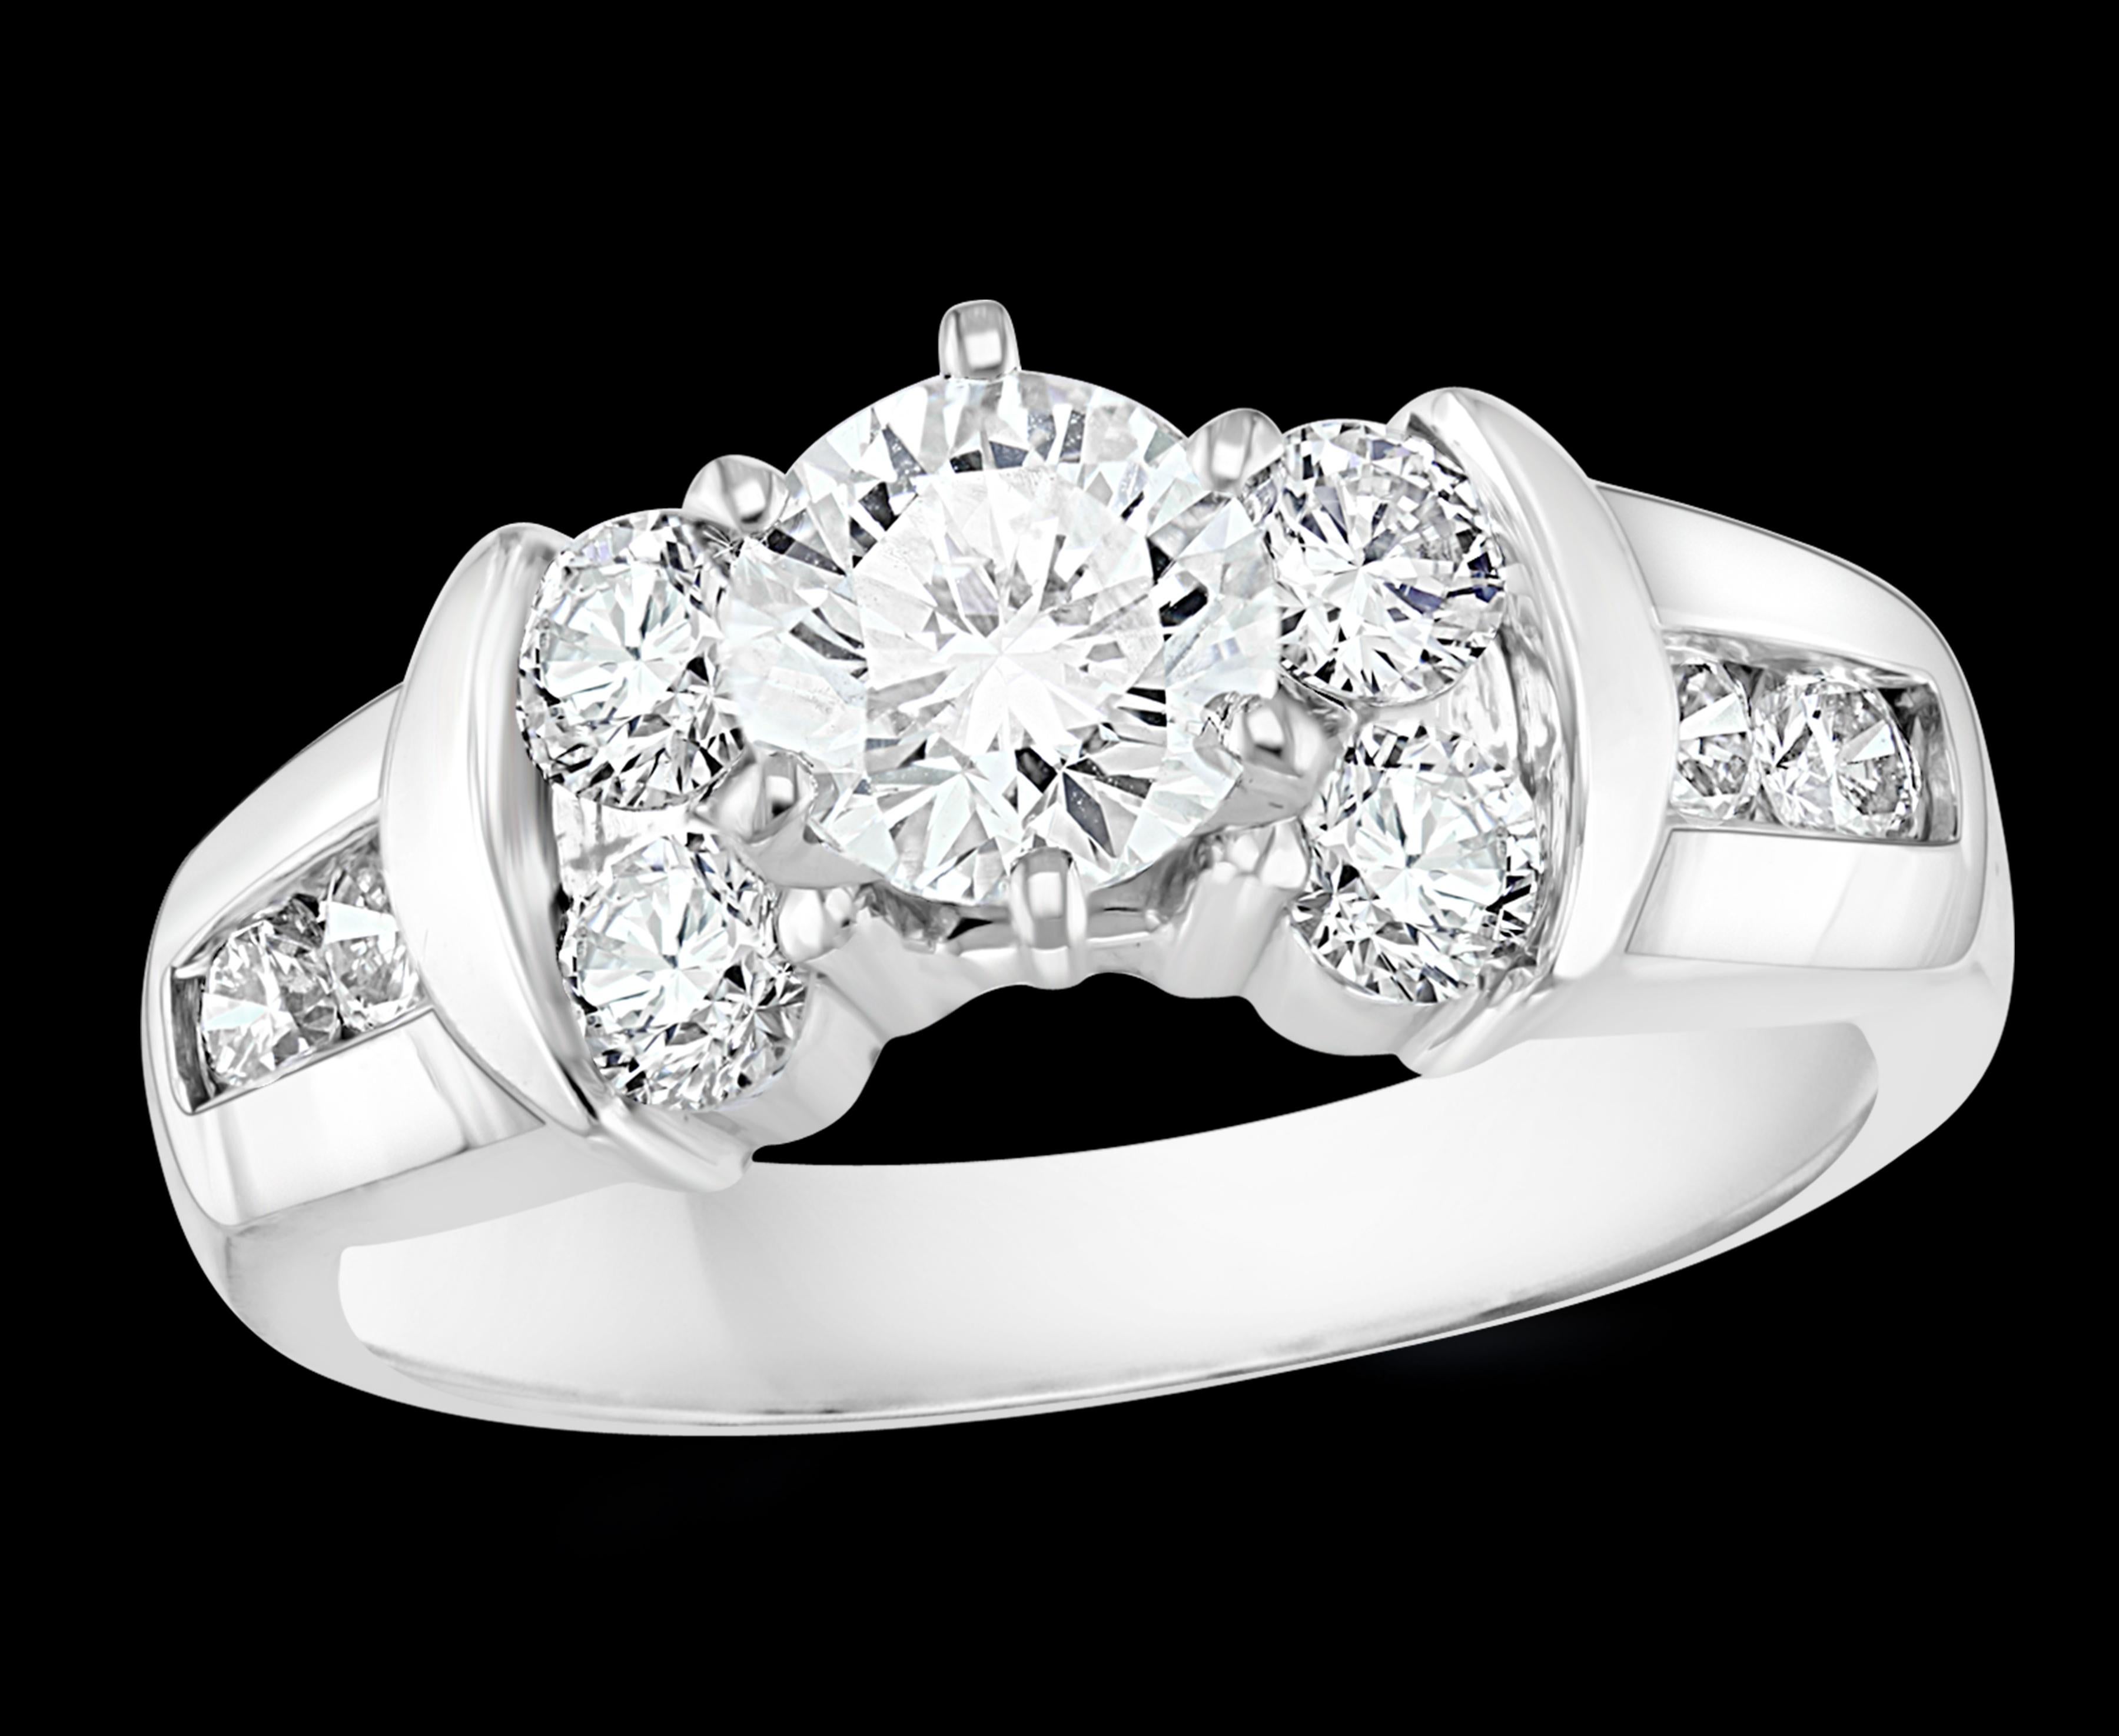 1.1 Carat Solitaire Round Shape 2.0 Total Diamond Engagement 14 White Gold Ring
Prong set
14 K gold Stamped 8.3 Grams
Diamond VS quality and G/H color.
Side diamonds are also round diamonds which weigh approximately 0.9 ct
Total Diamond Weight  2.0 